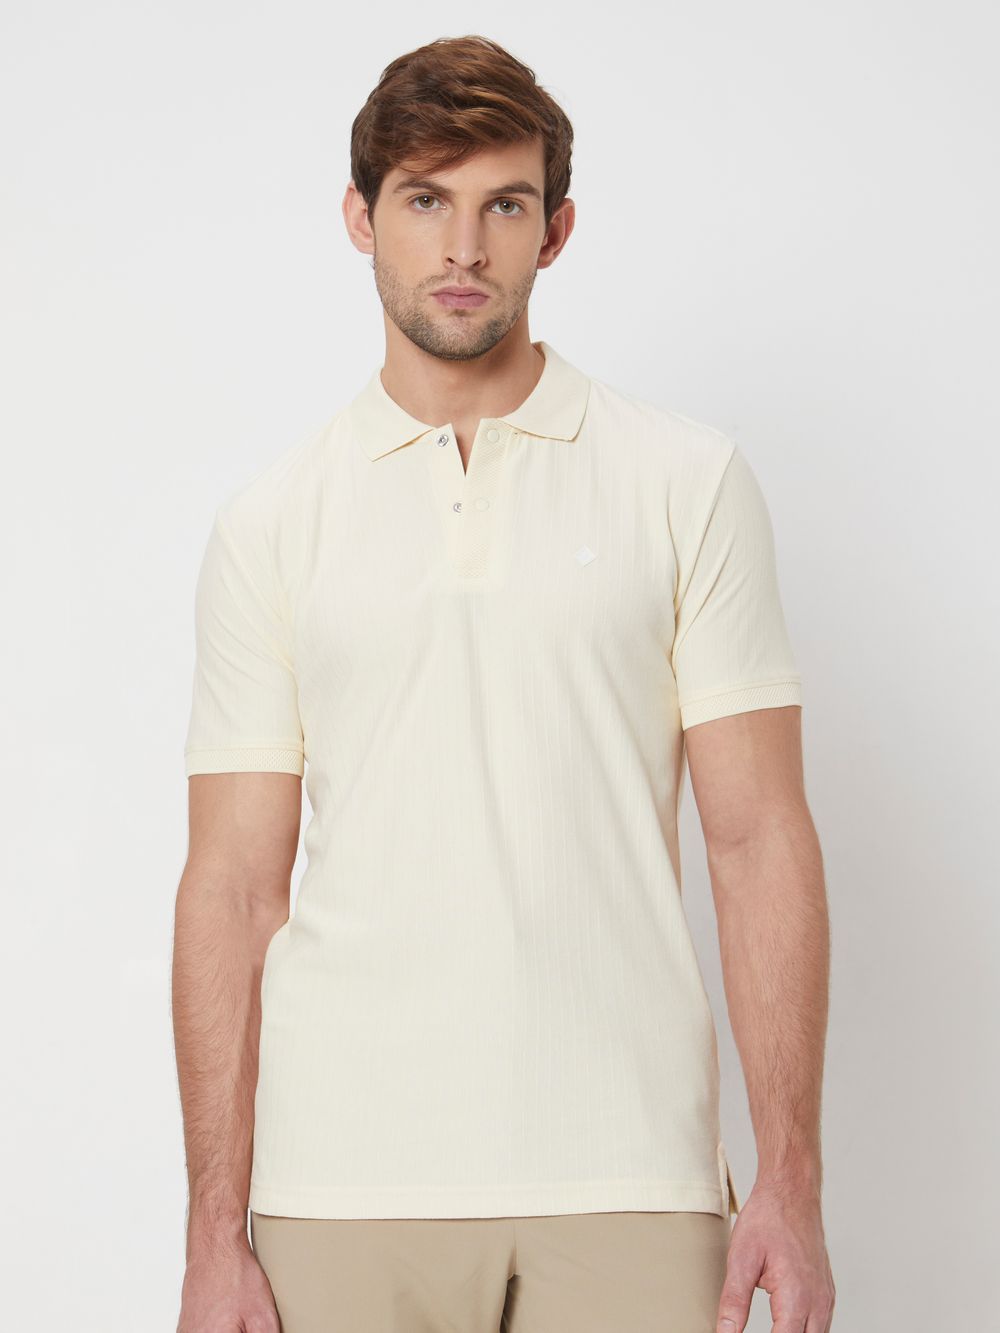 Off White Textured Plain Slim Fit Jersey Polo T-Shirt